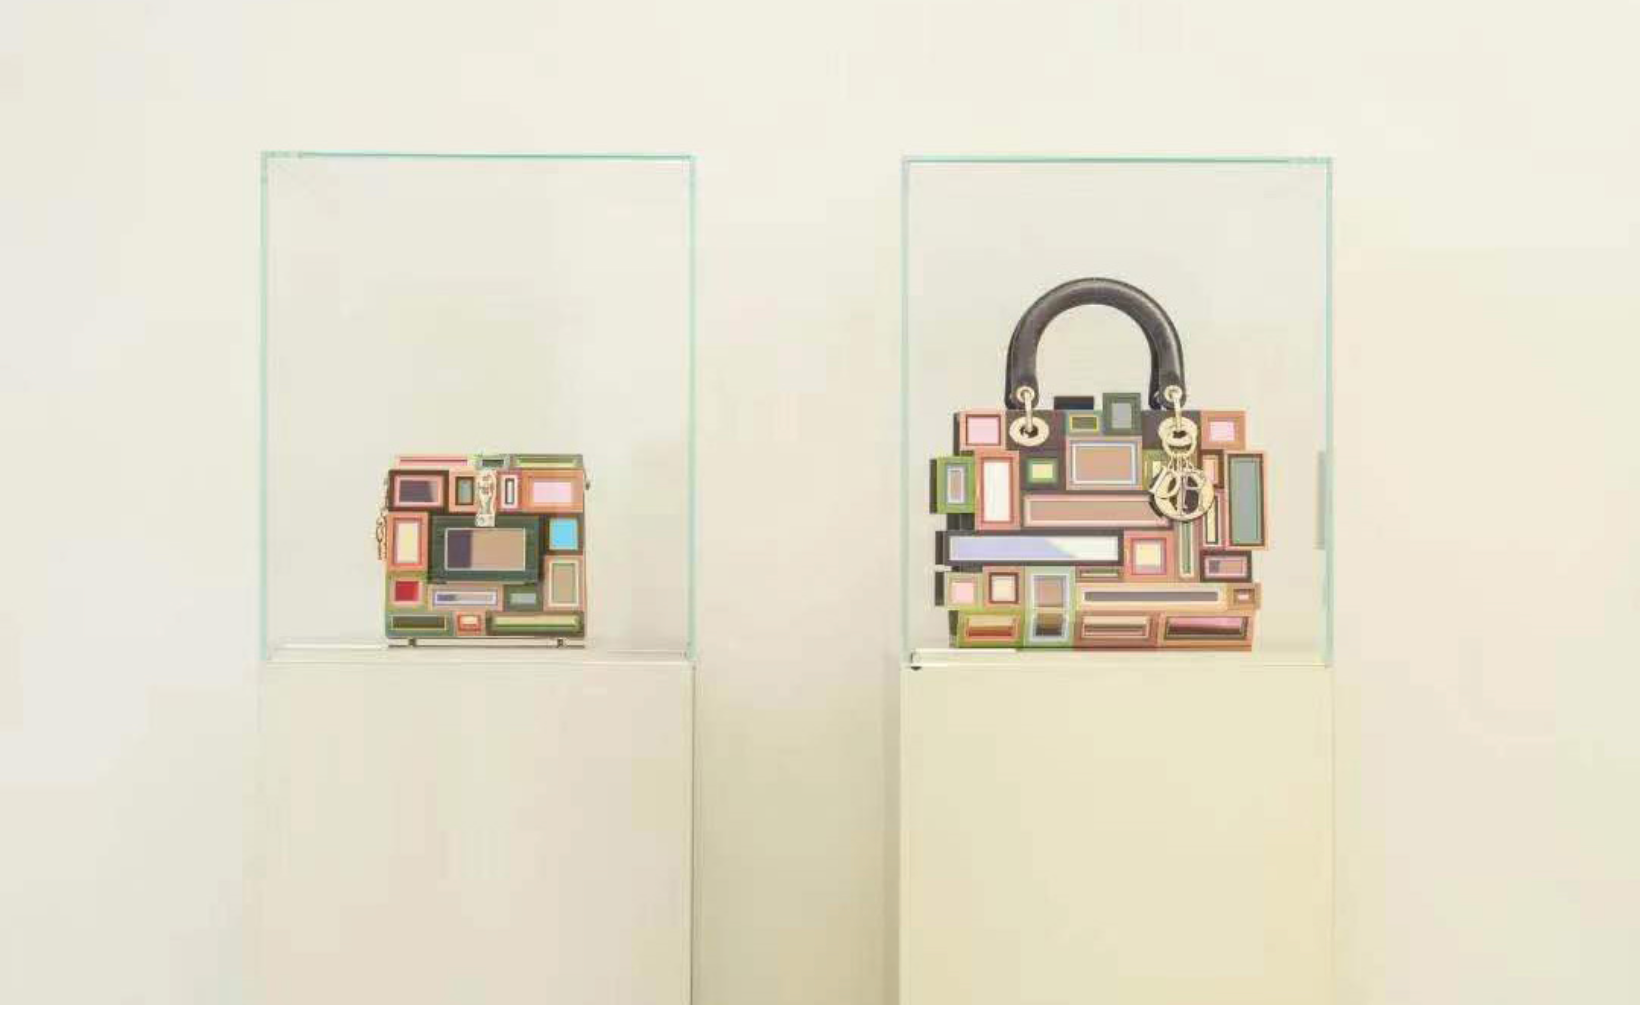 Dior is one of a growing number of global luxury brands that have worked with Chinese artists, such as in this installation of a reimagined handbag by Song Dong that was displayed at the ART021 Shanghai Contemporary Art Fair in 2020. Credit: Dior